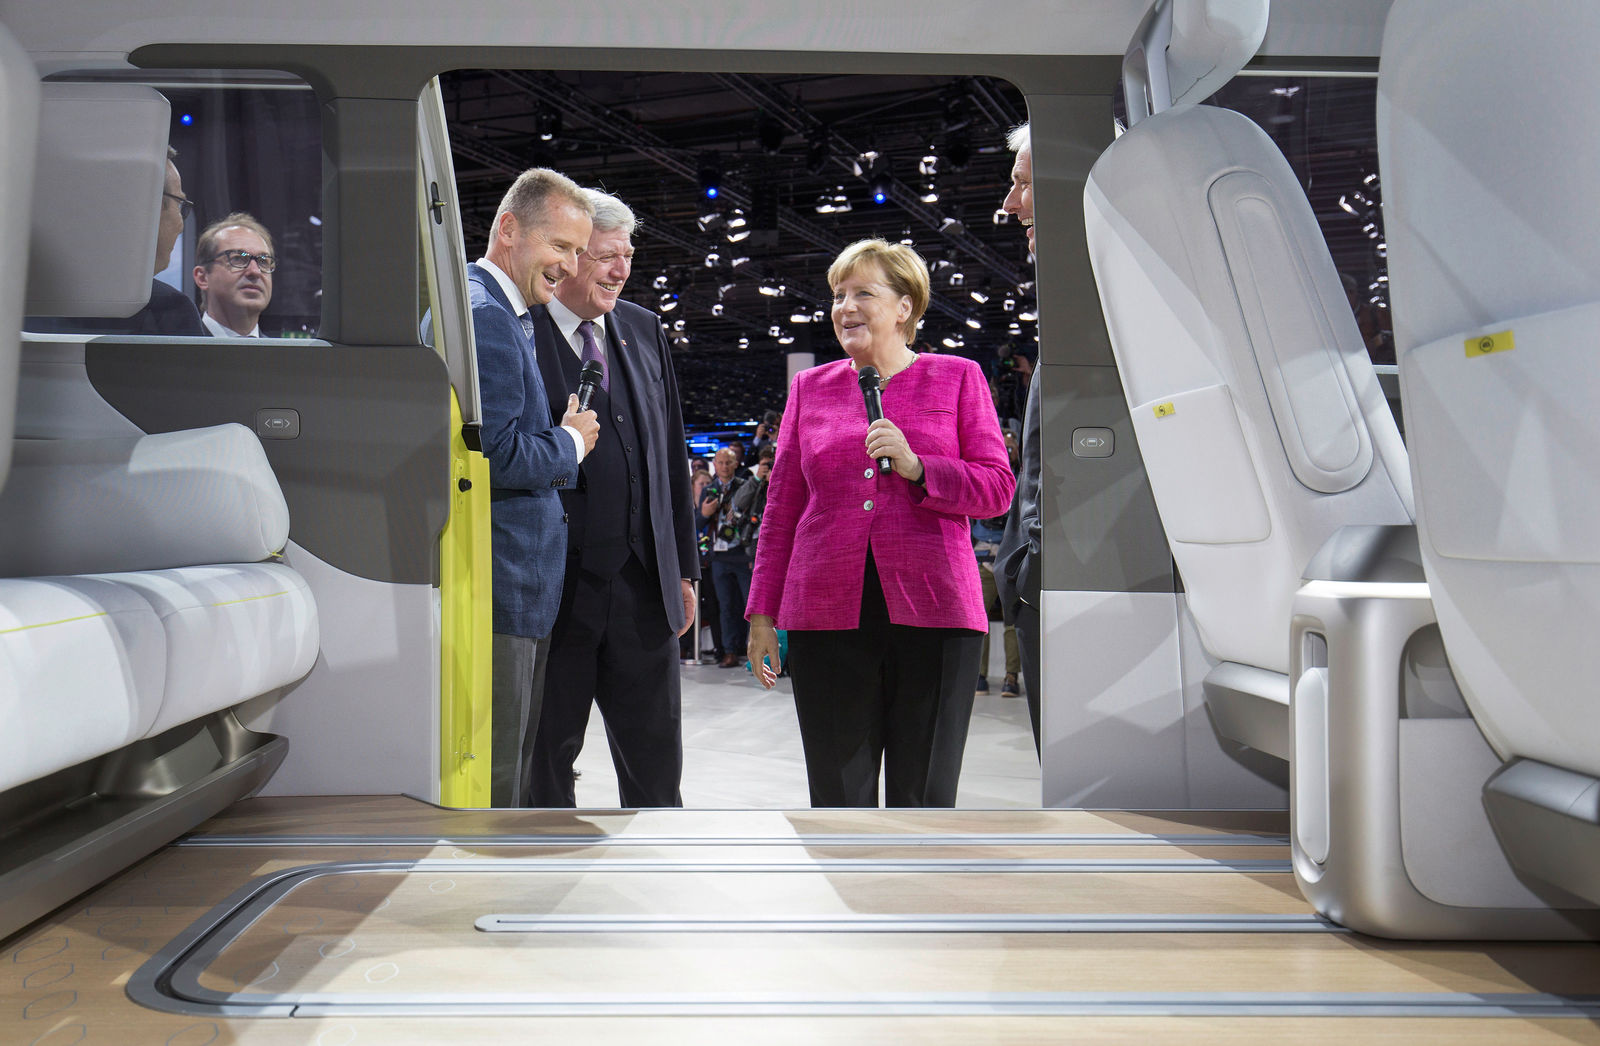 German Chancellor Dr. Angela Merkel visits the Volkswagen booth at the IAA 2017